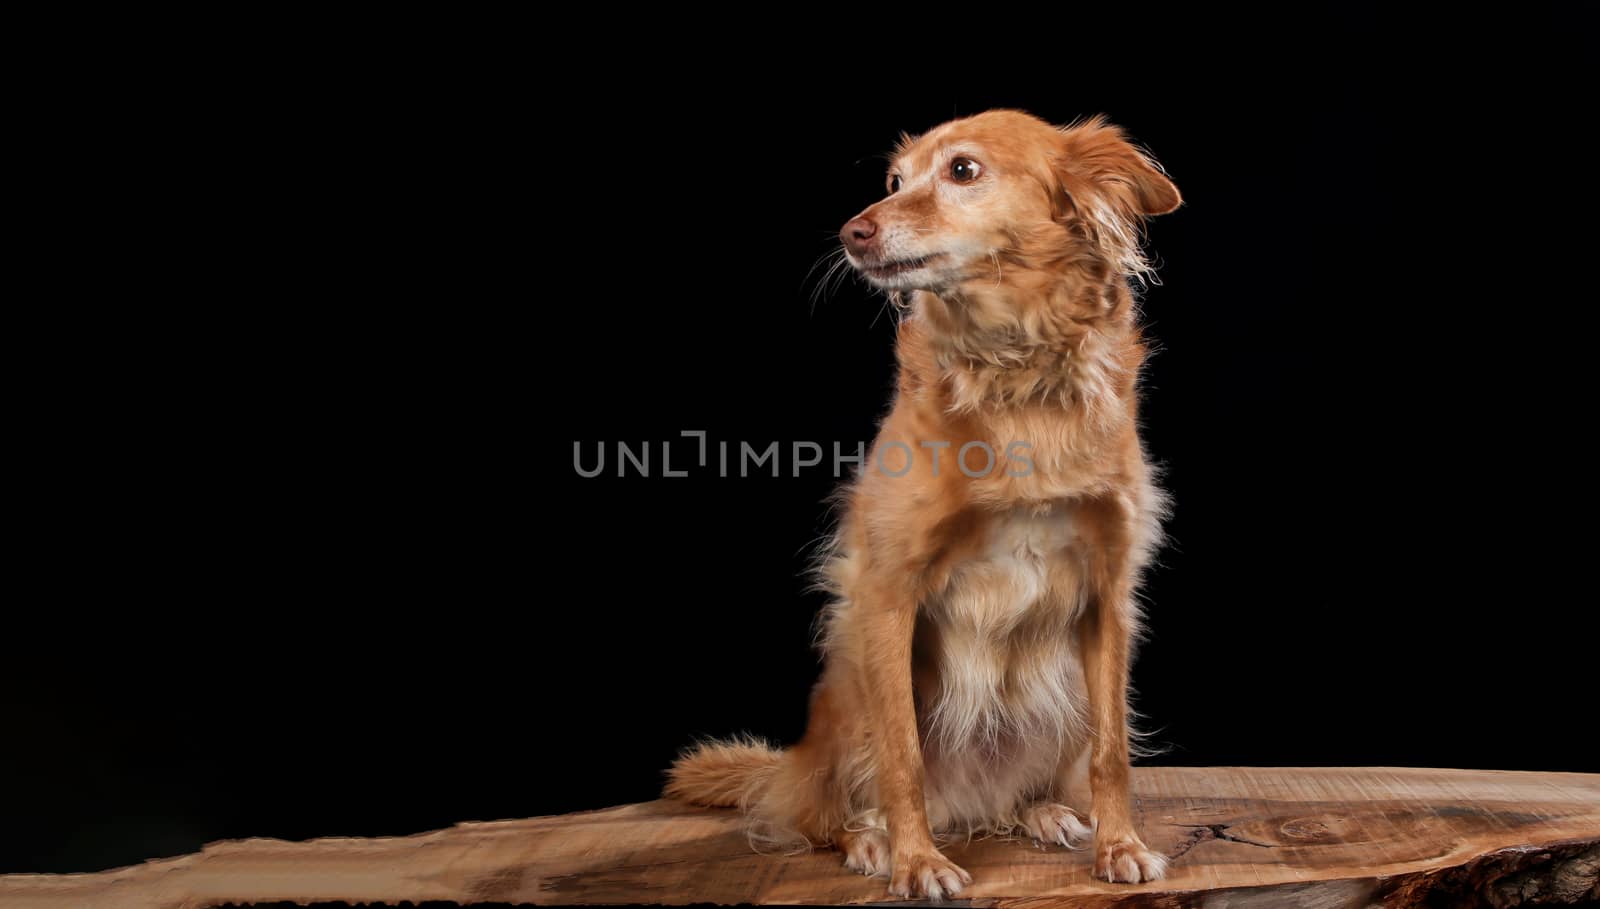 Dog portrait on a wooden plank before a black background with open mouth